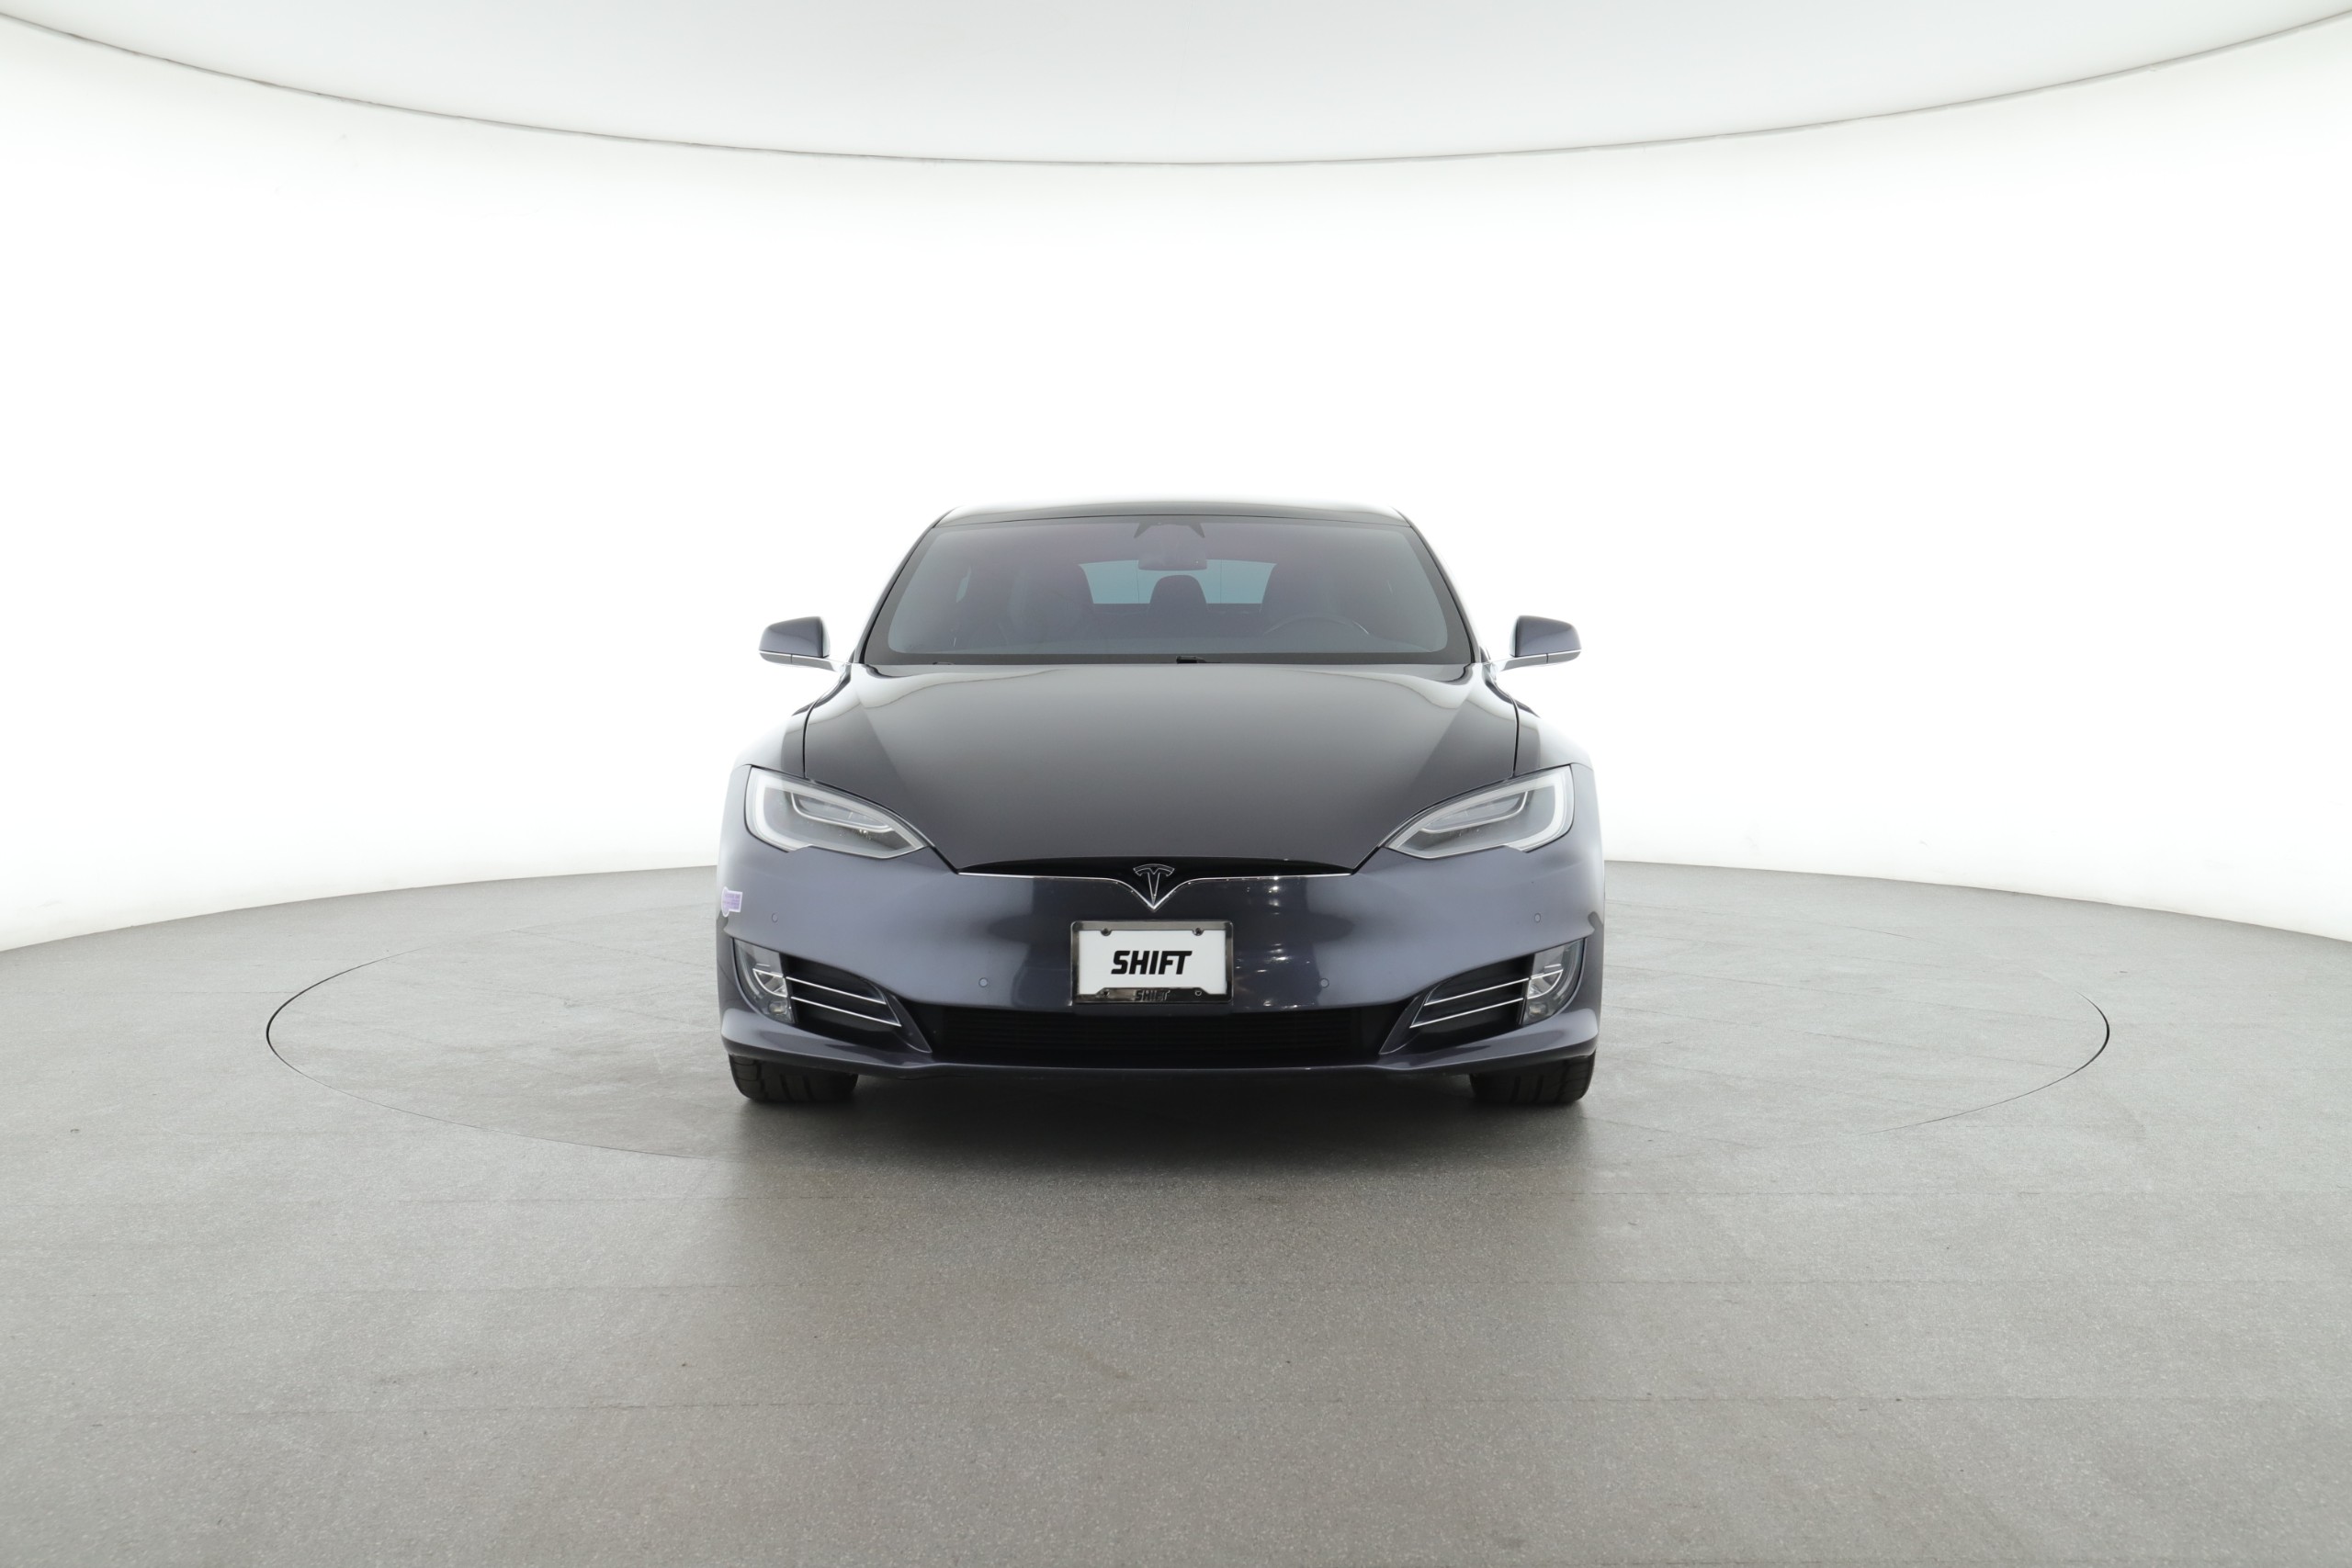 Tesla Model S: The Electric Car That’s Changing the Game